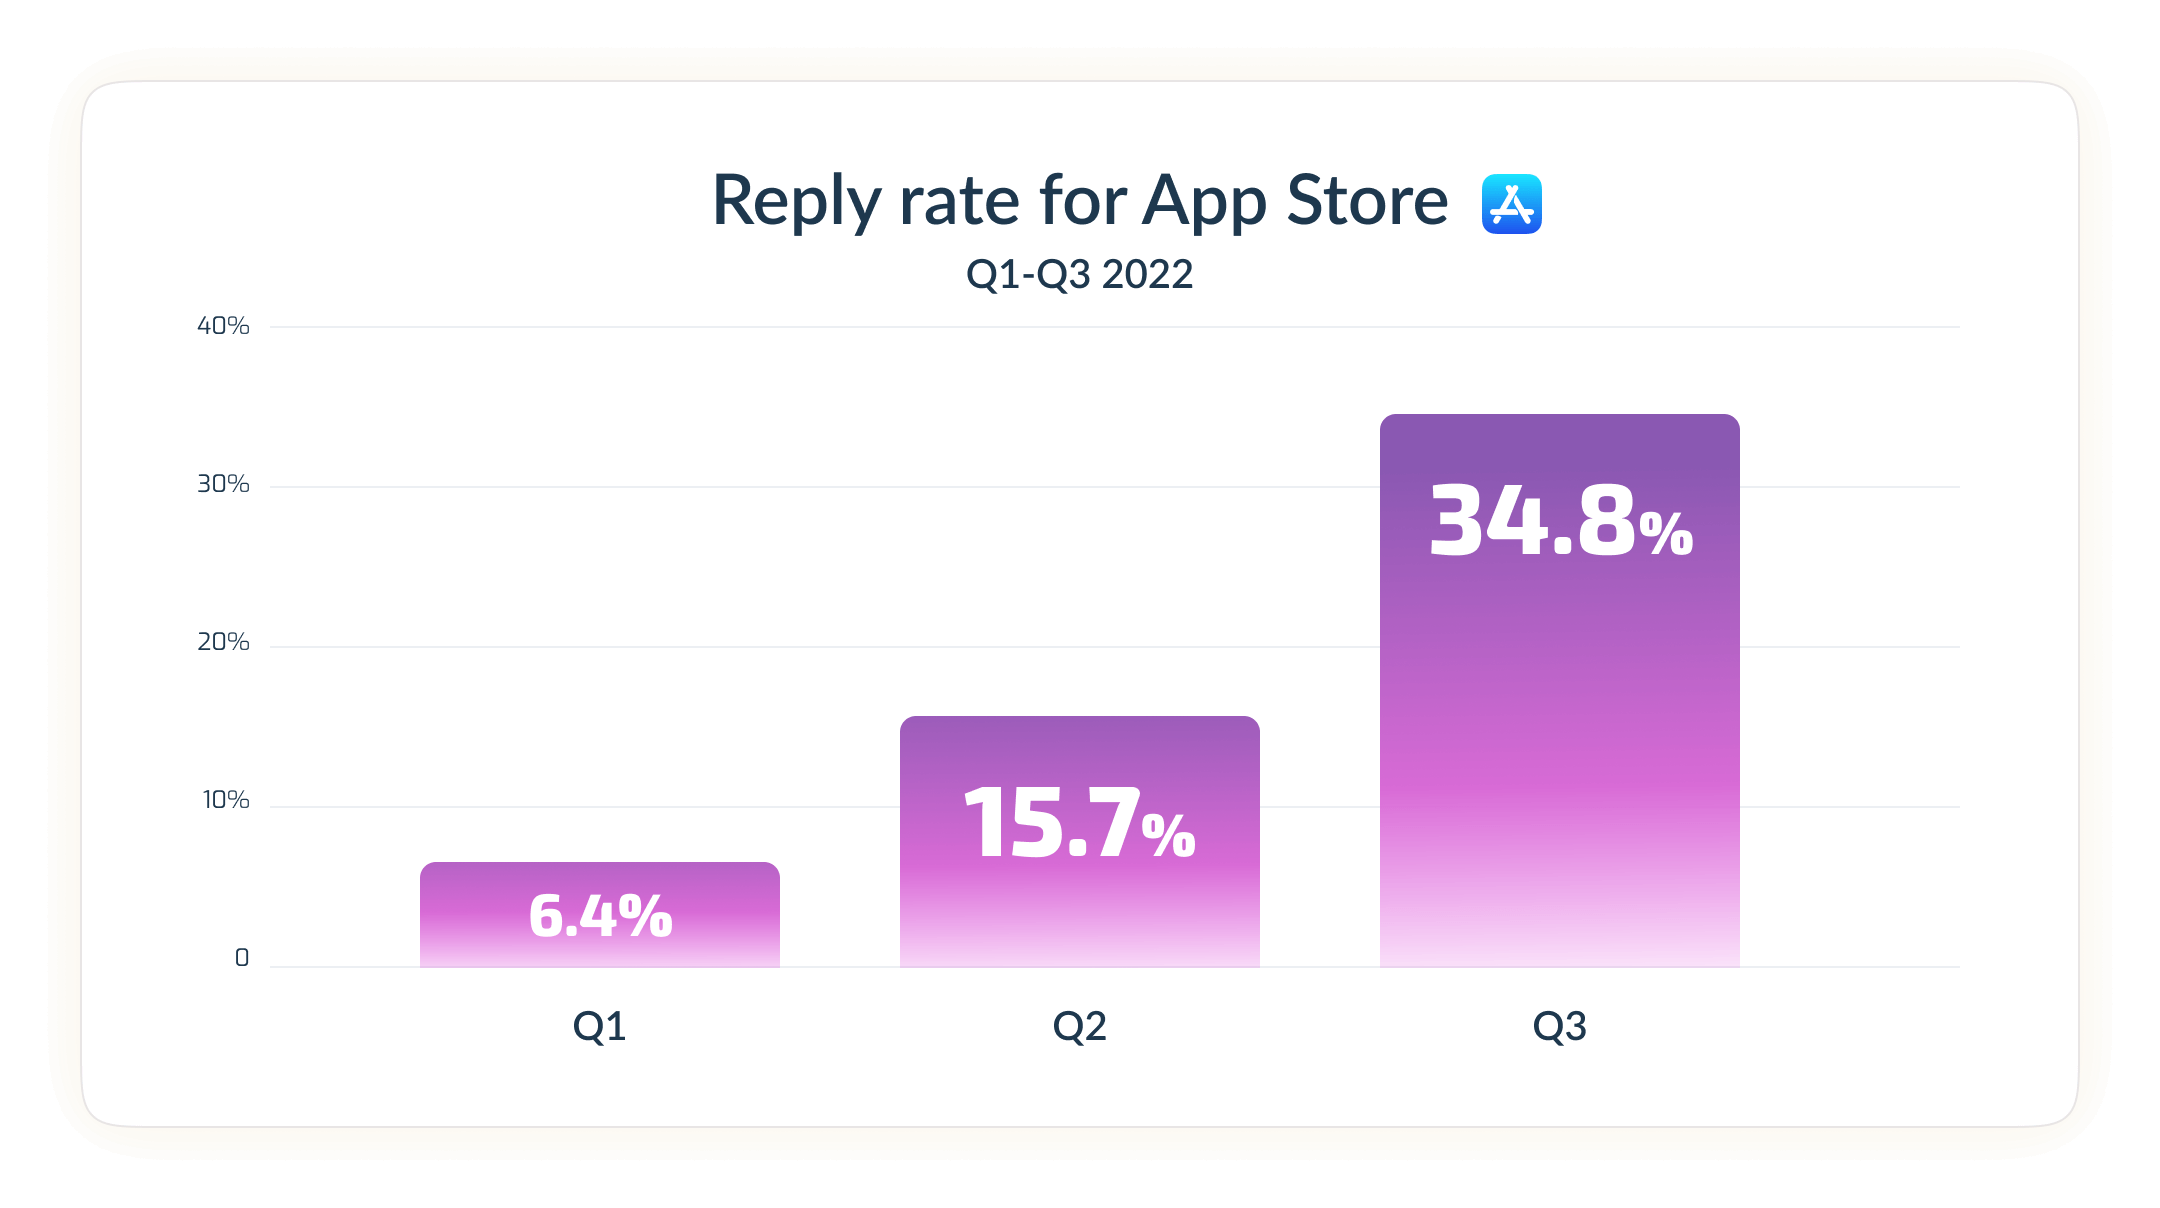 Reply rate for AS